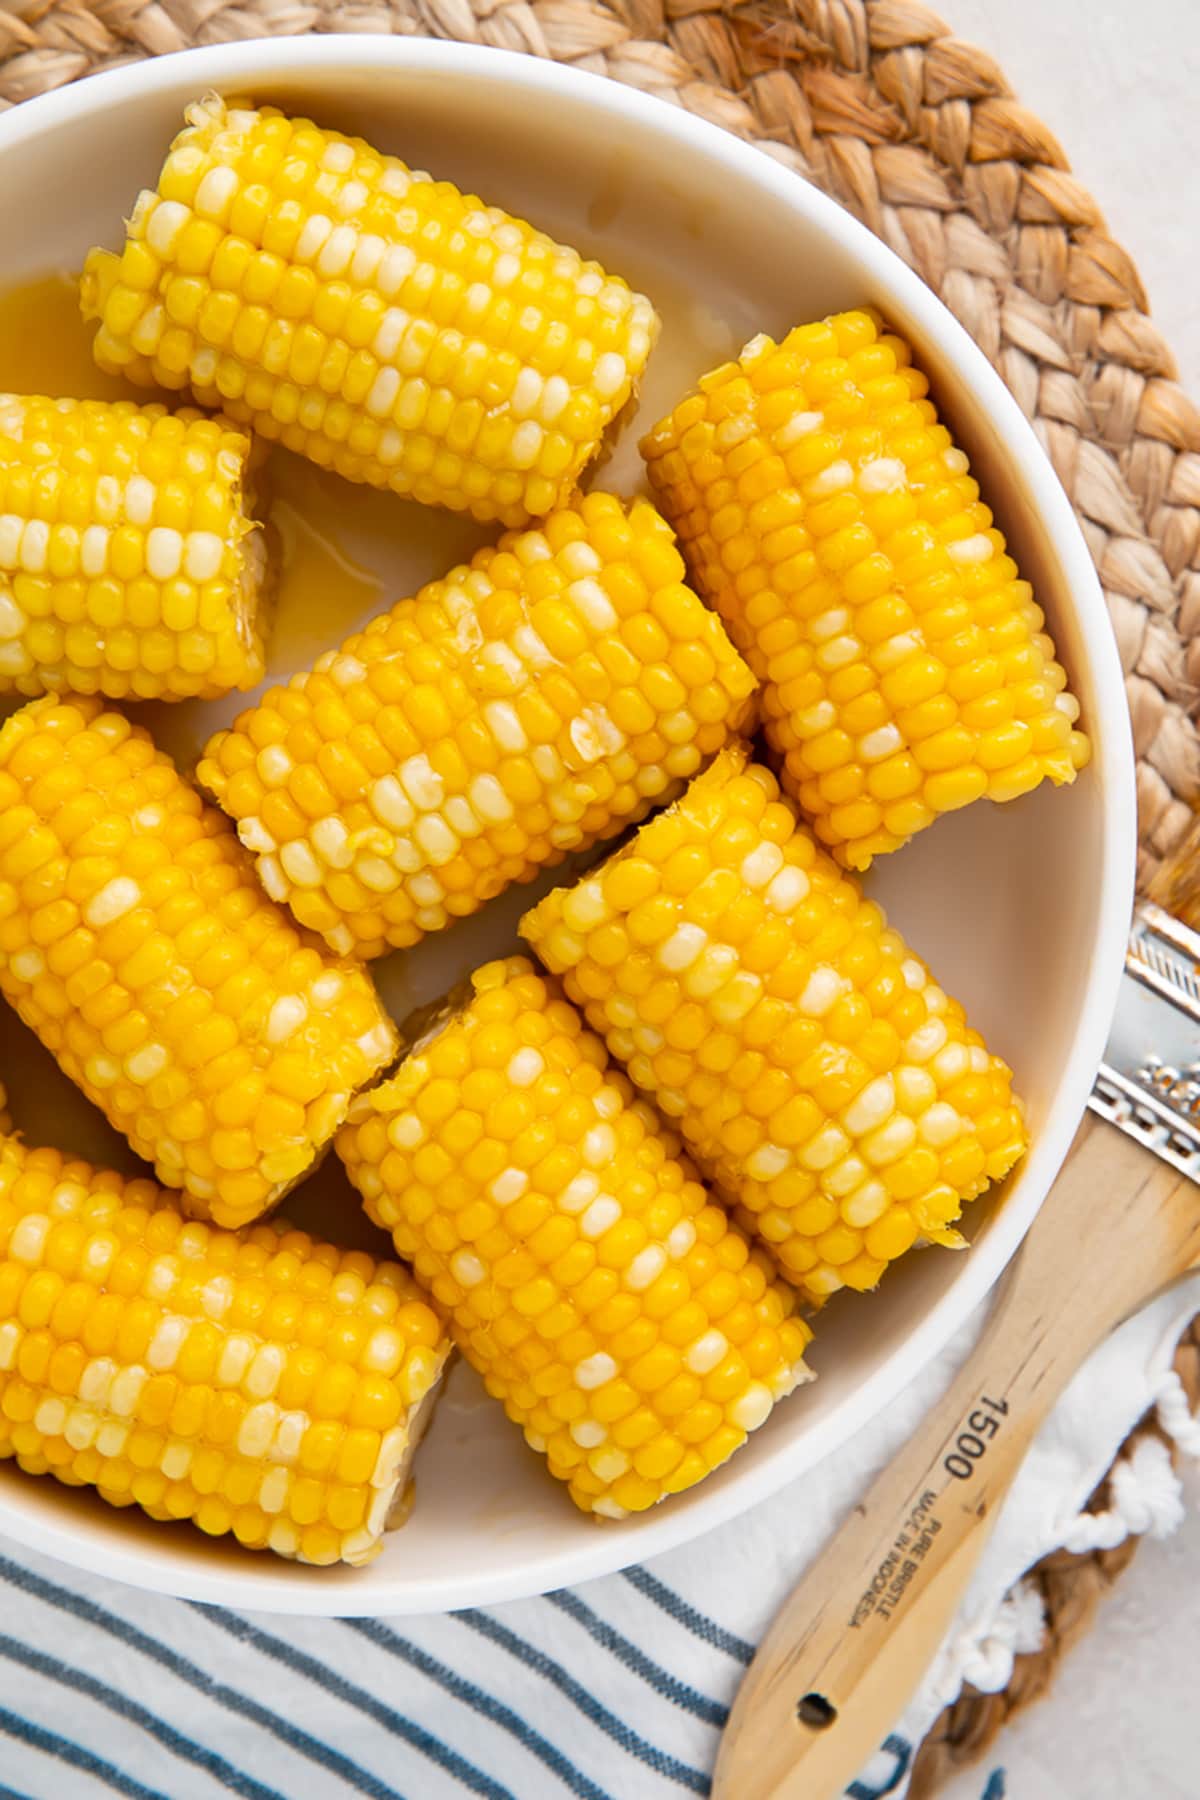 Instant Pot corn on the cob with a honey butter glaze in a large white bowl on a wicker placemat.